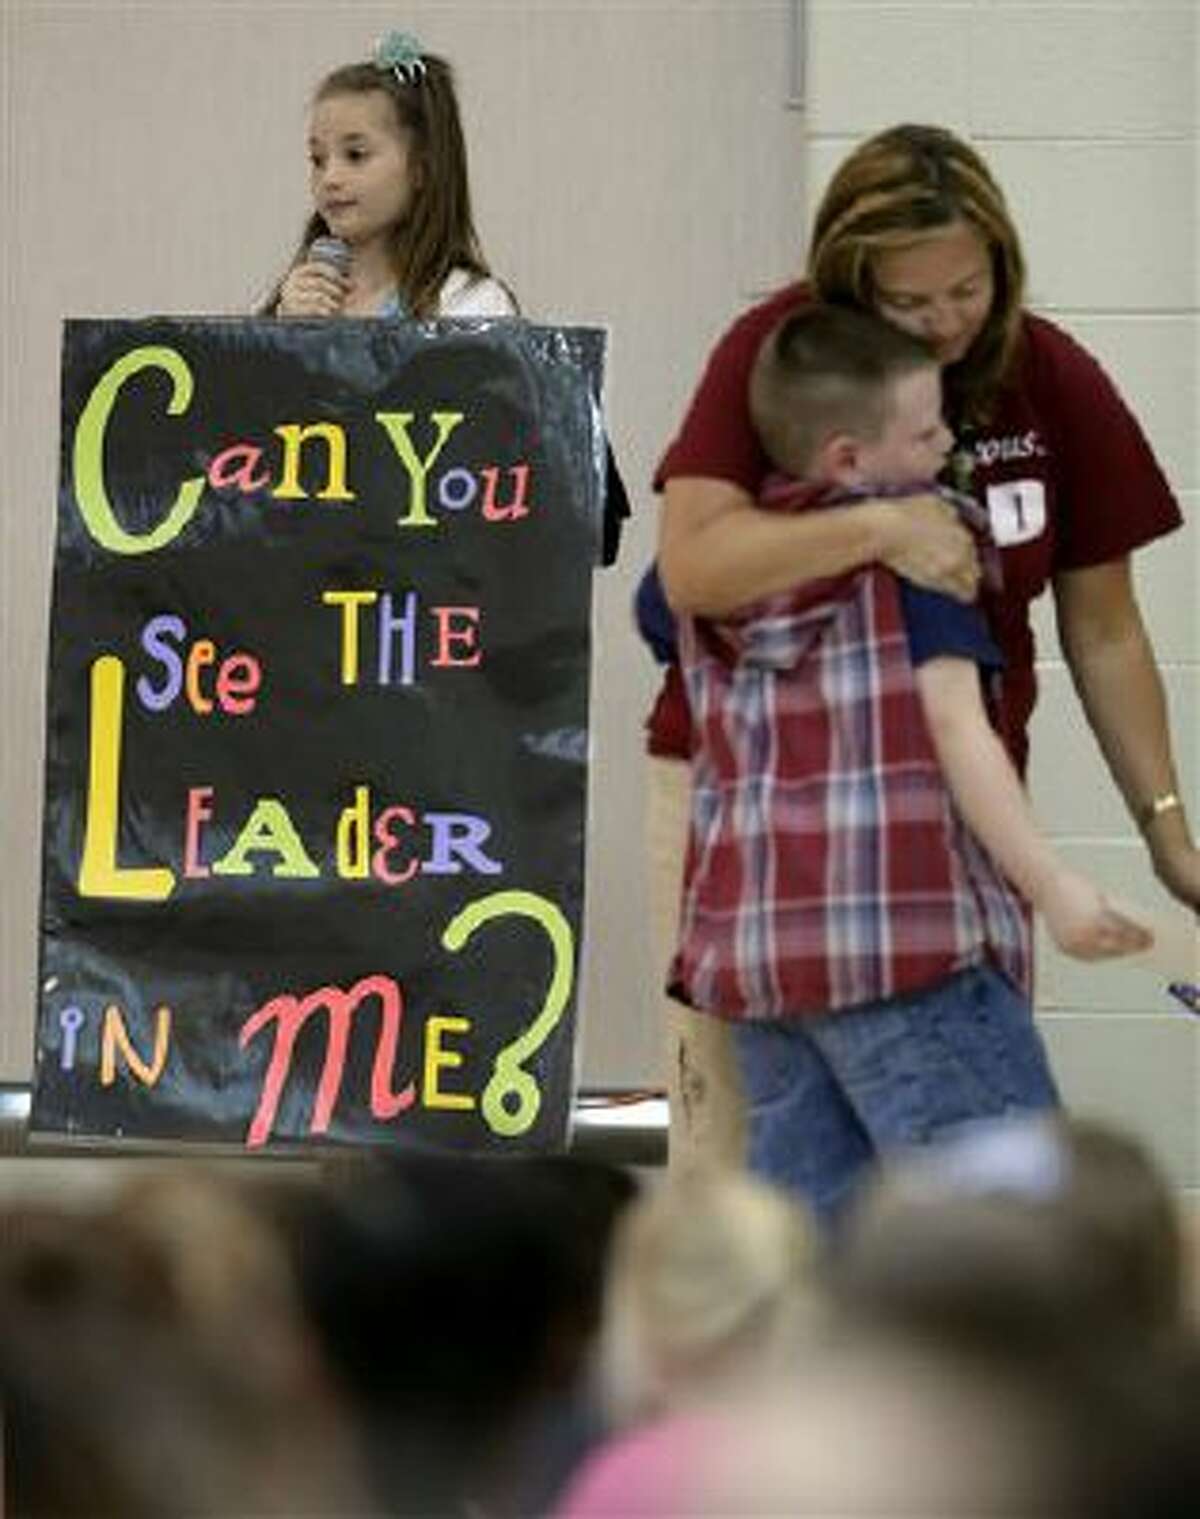 In this photo taken Friday, Sept. 6, 2013, third-grader Jonathan Kent gets a hug from his teacher Mandy Brown after getting an award during a monthly leadership assembly presided over by fourth-grader Anita Bedworth at Indian Trails Elementary school in Independence, Mo.